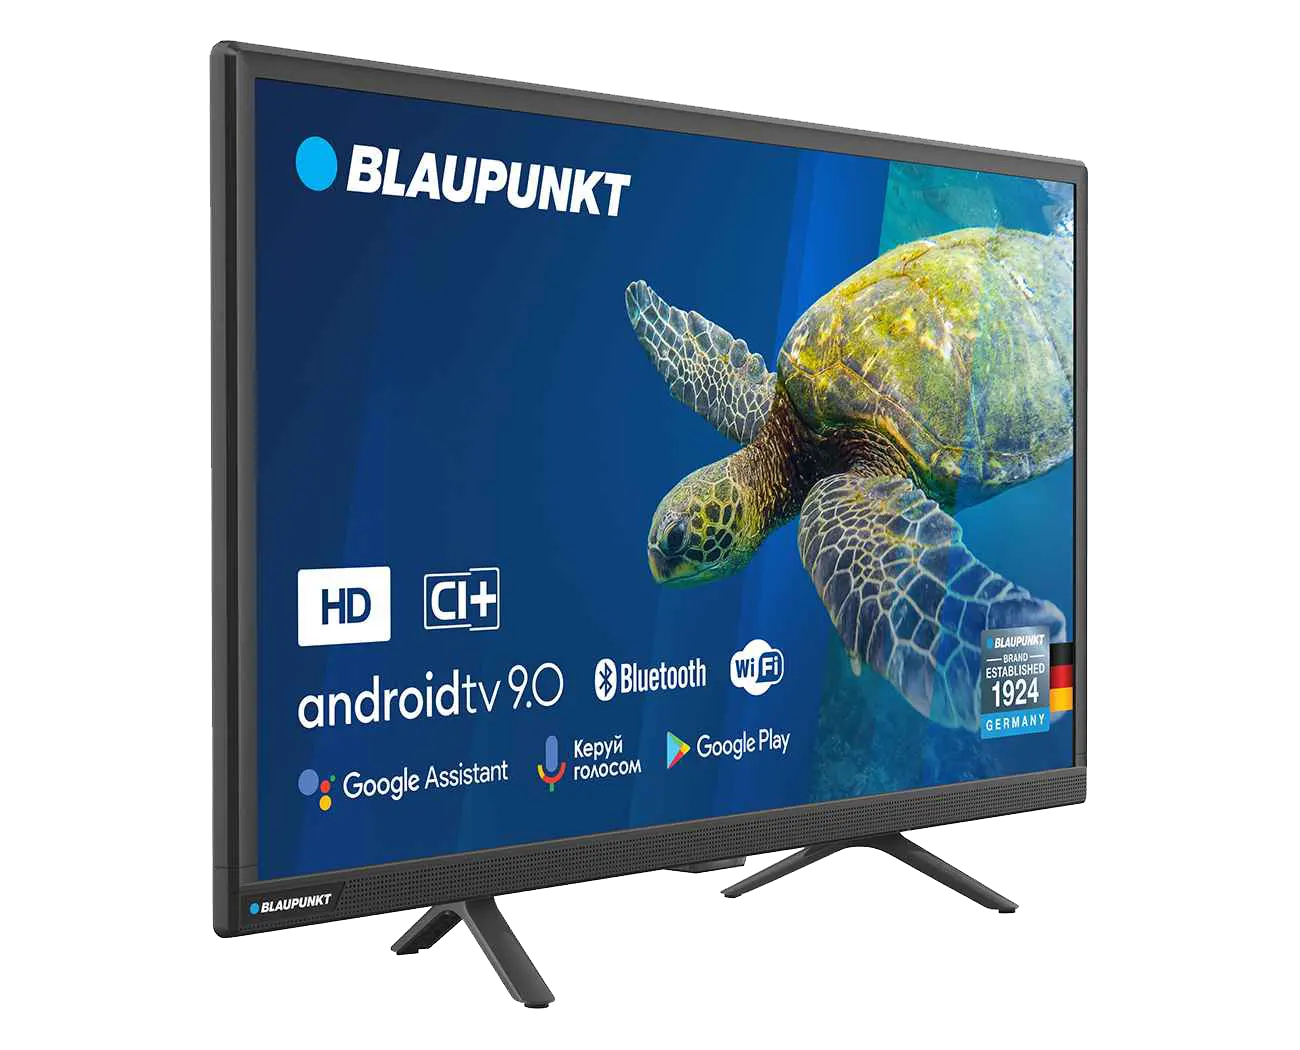 HD-Ready Android TV Blaupunkt 32HB5000